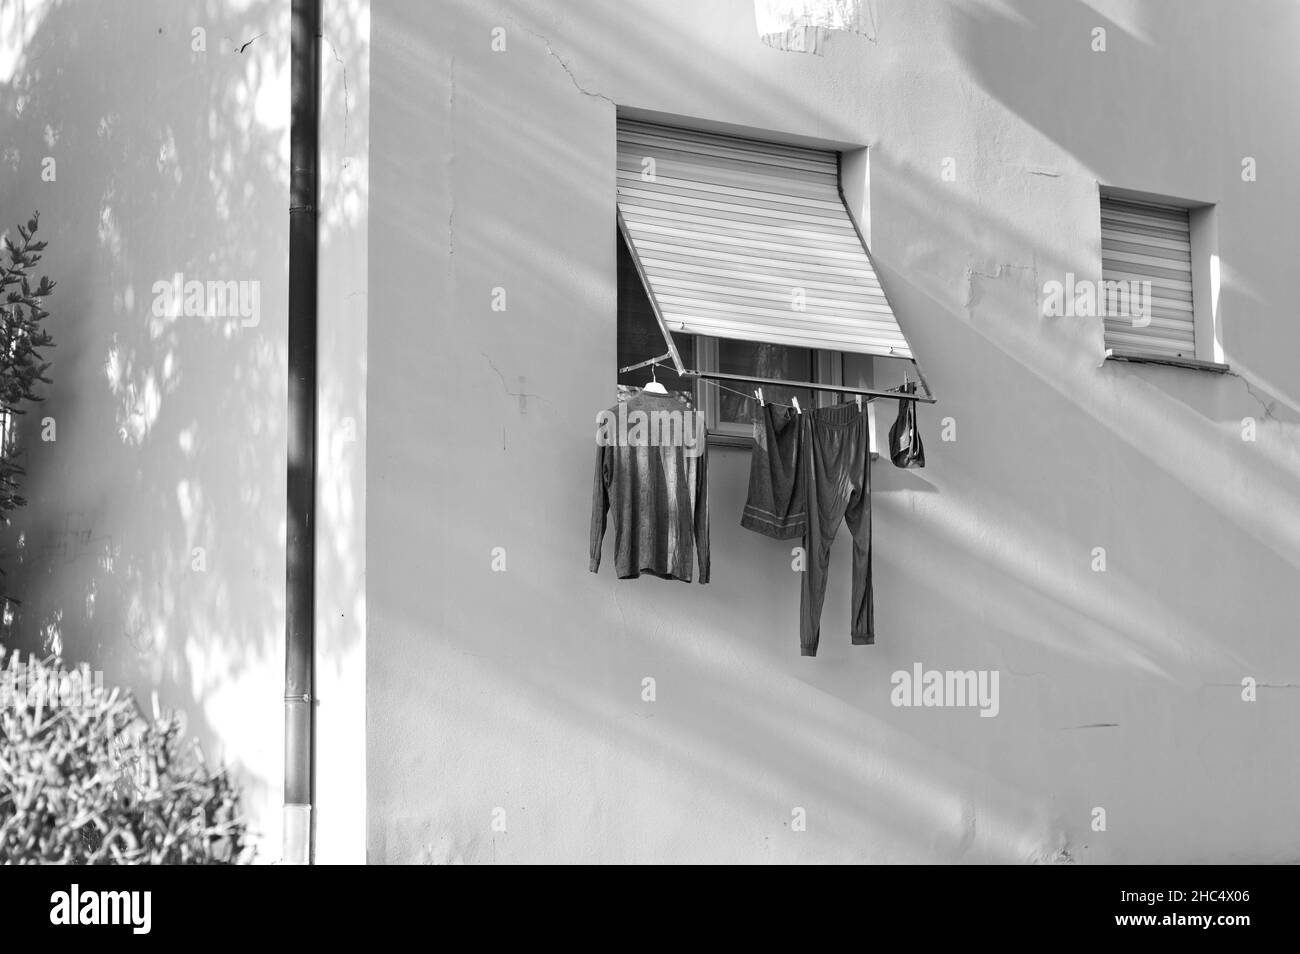 Clothes, towels and bed sheets hanging out of the window to dry (Pesaro, Italy, Europe) Stock Photo